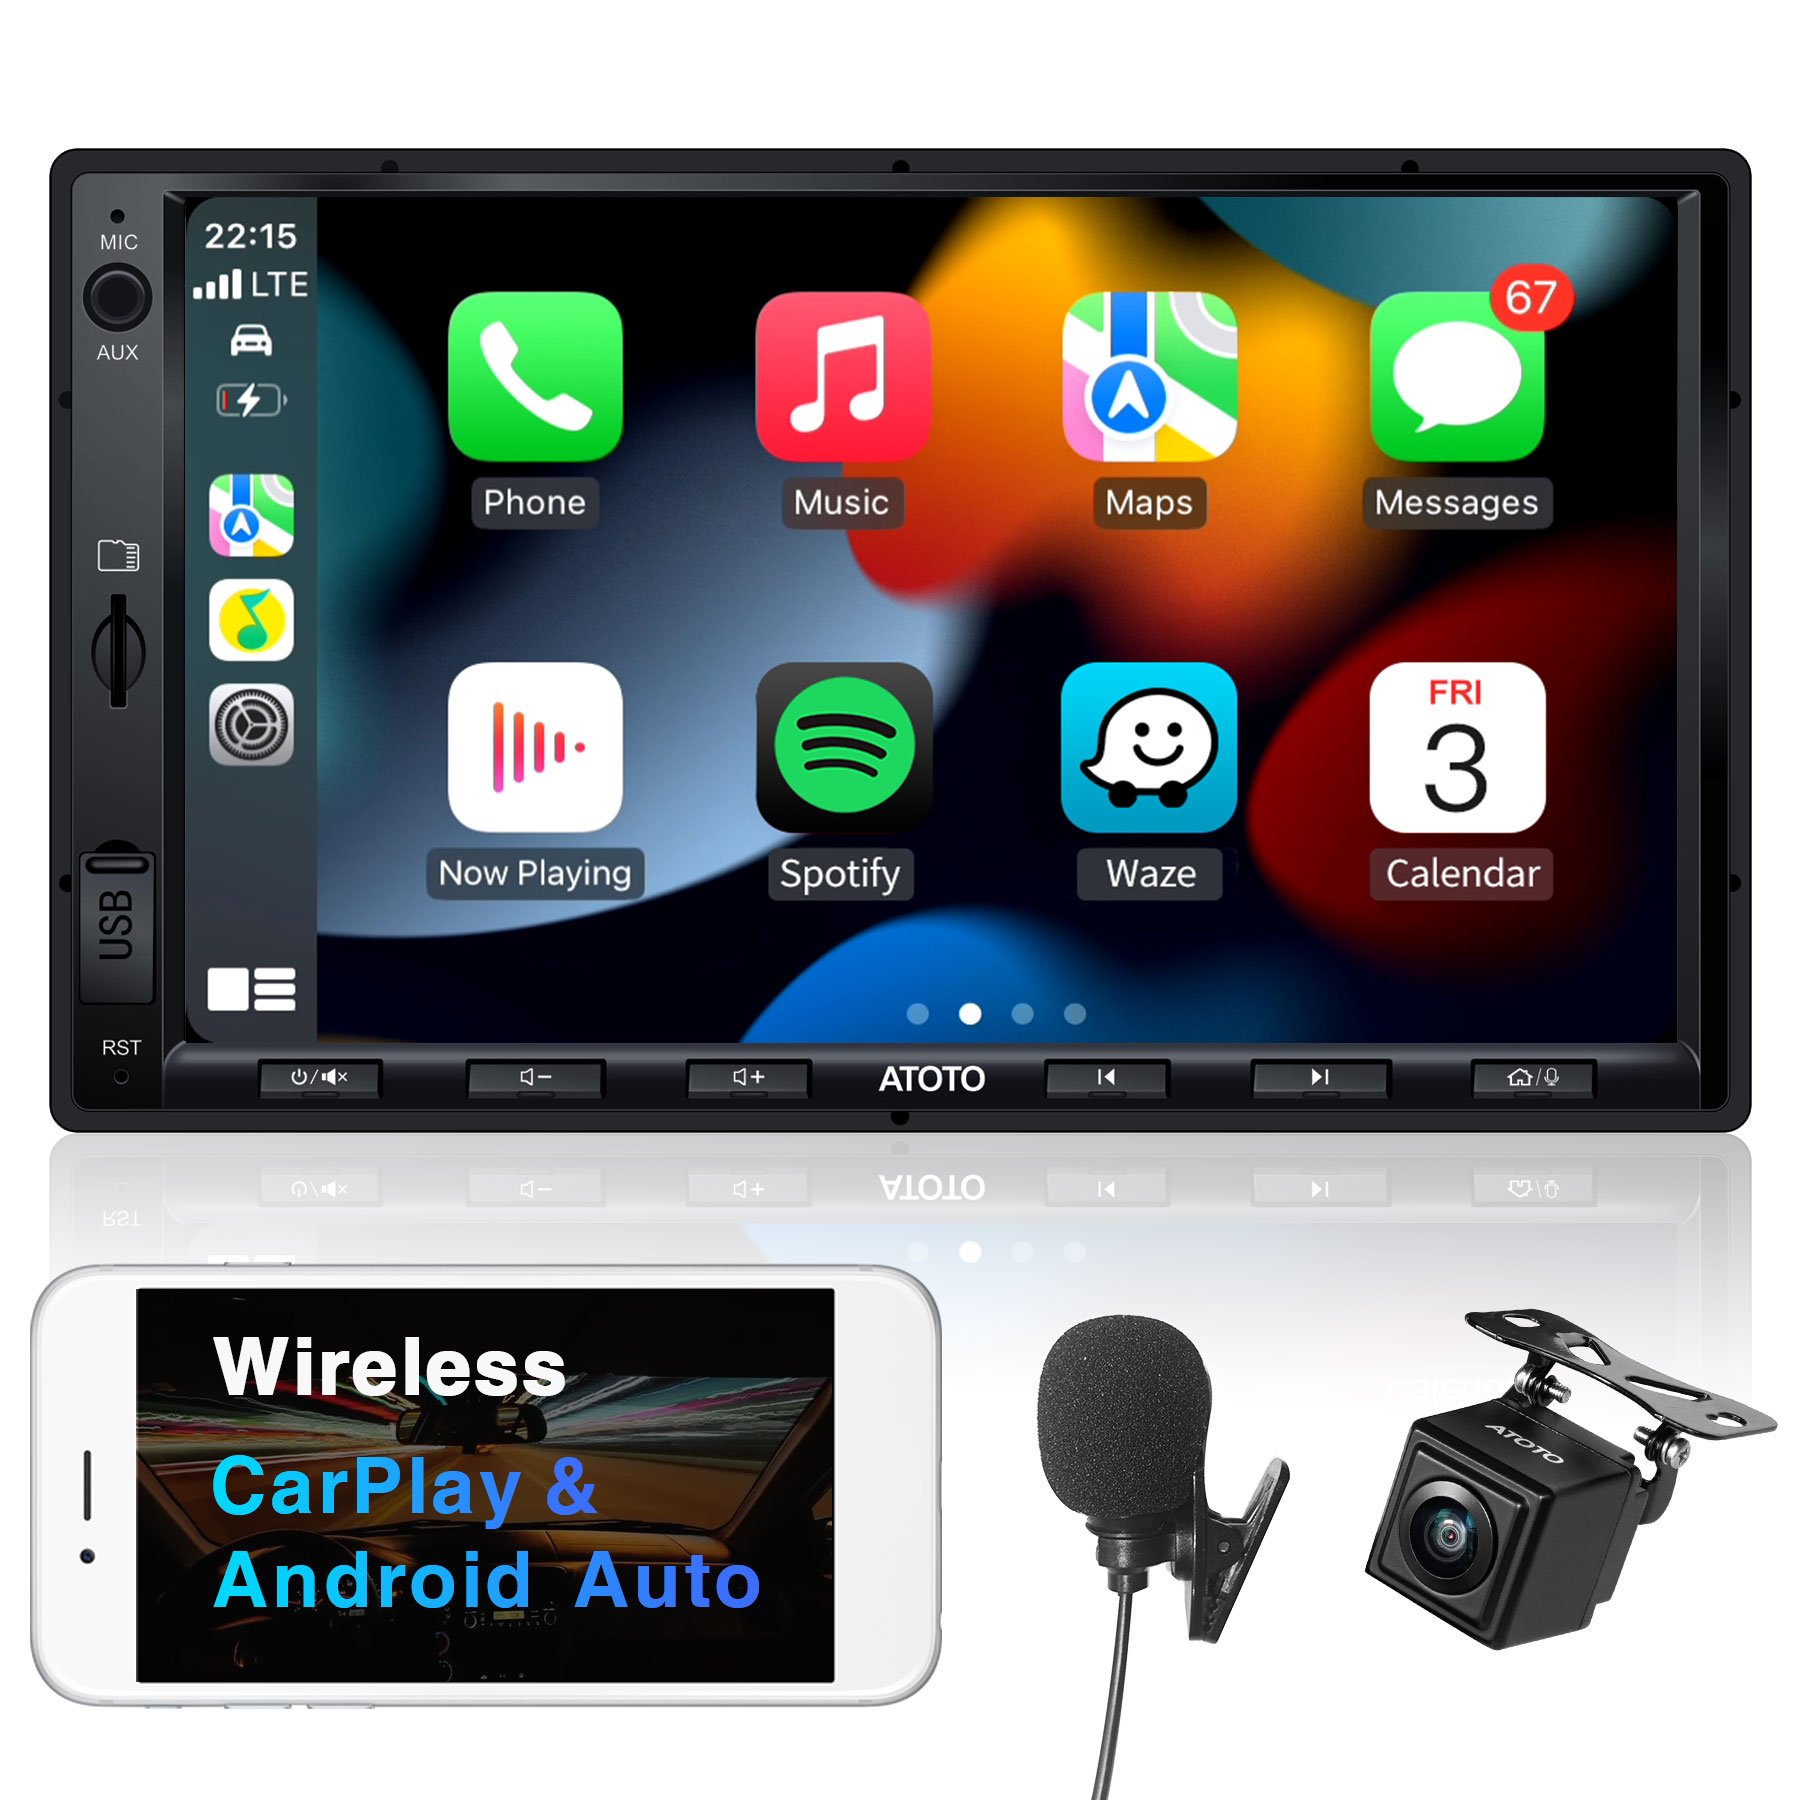 ATOTO F7G2A7XE NA S01 Car Stereo Apple Carplay Android Auto 7 Inch 